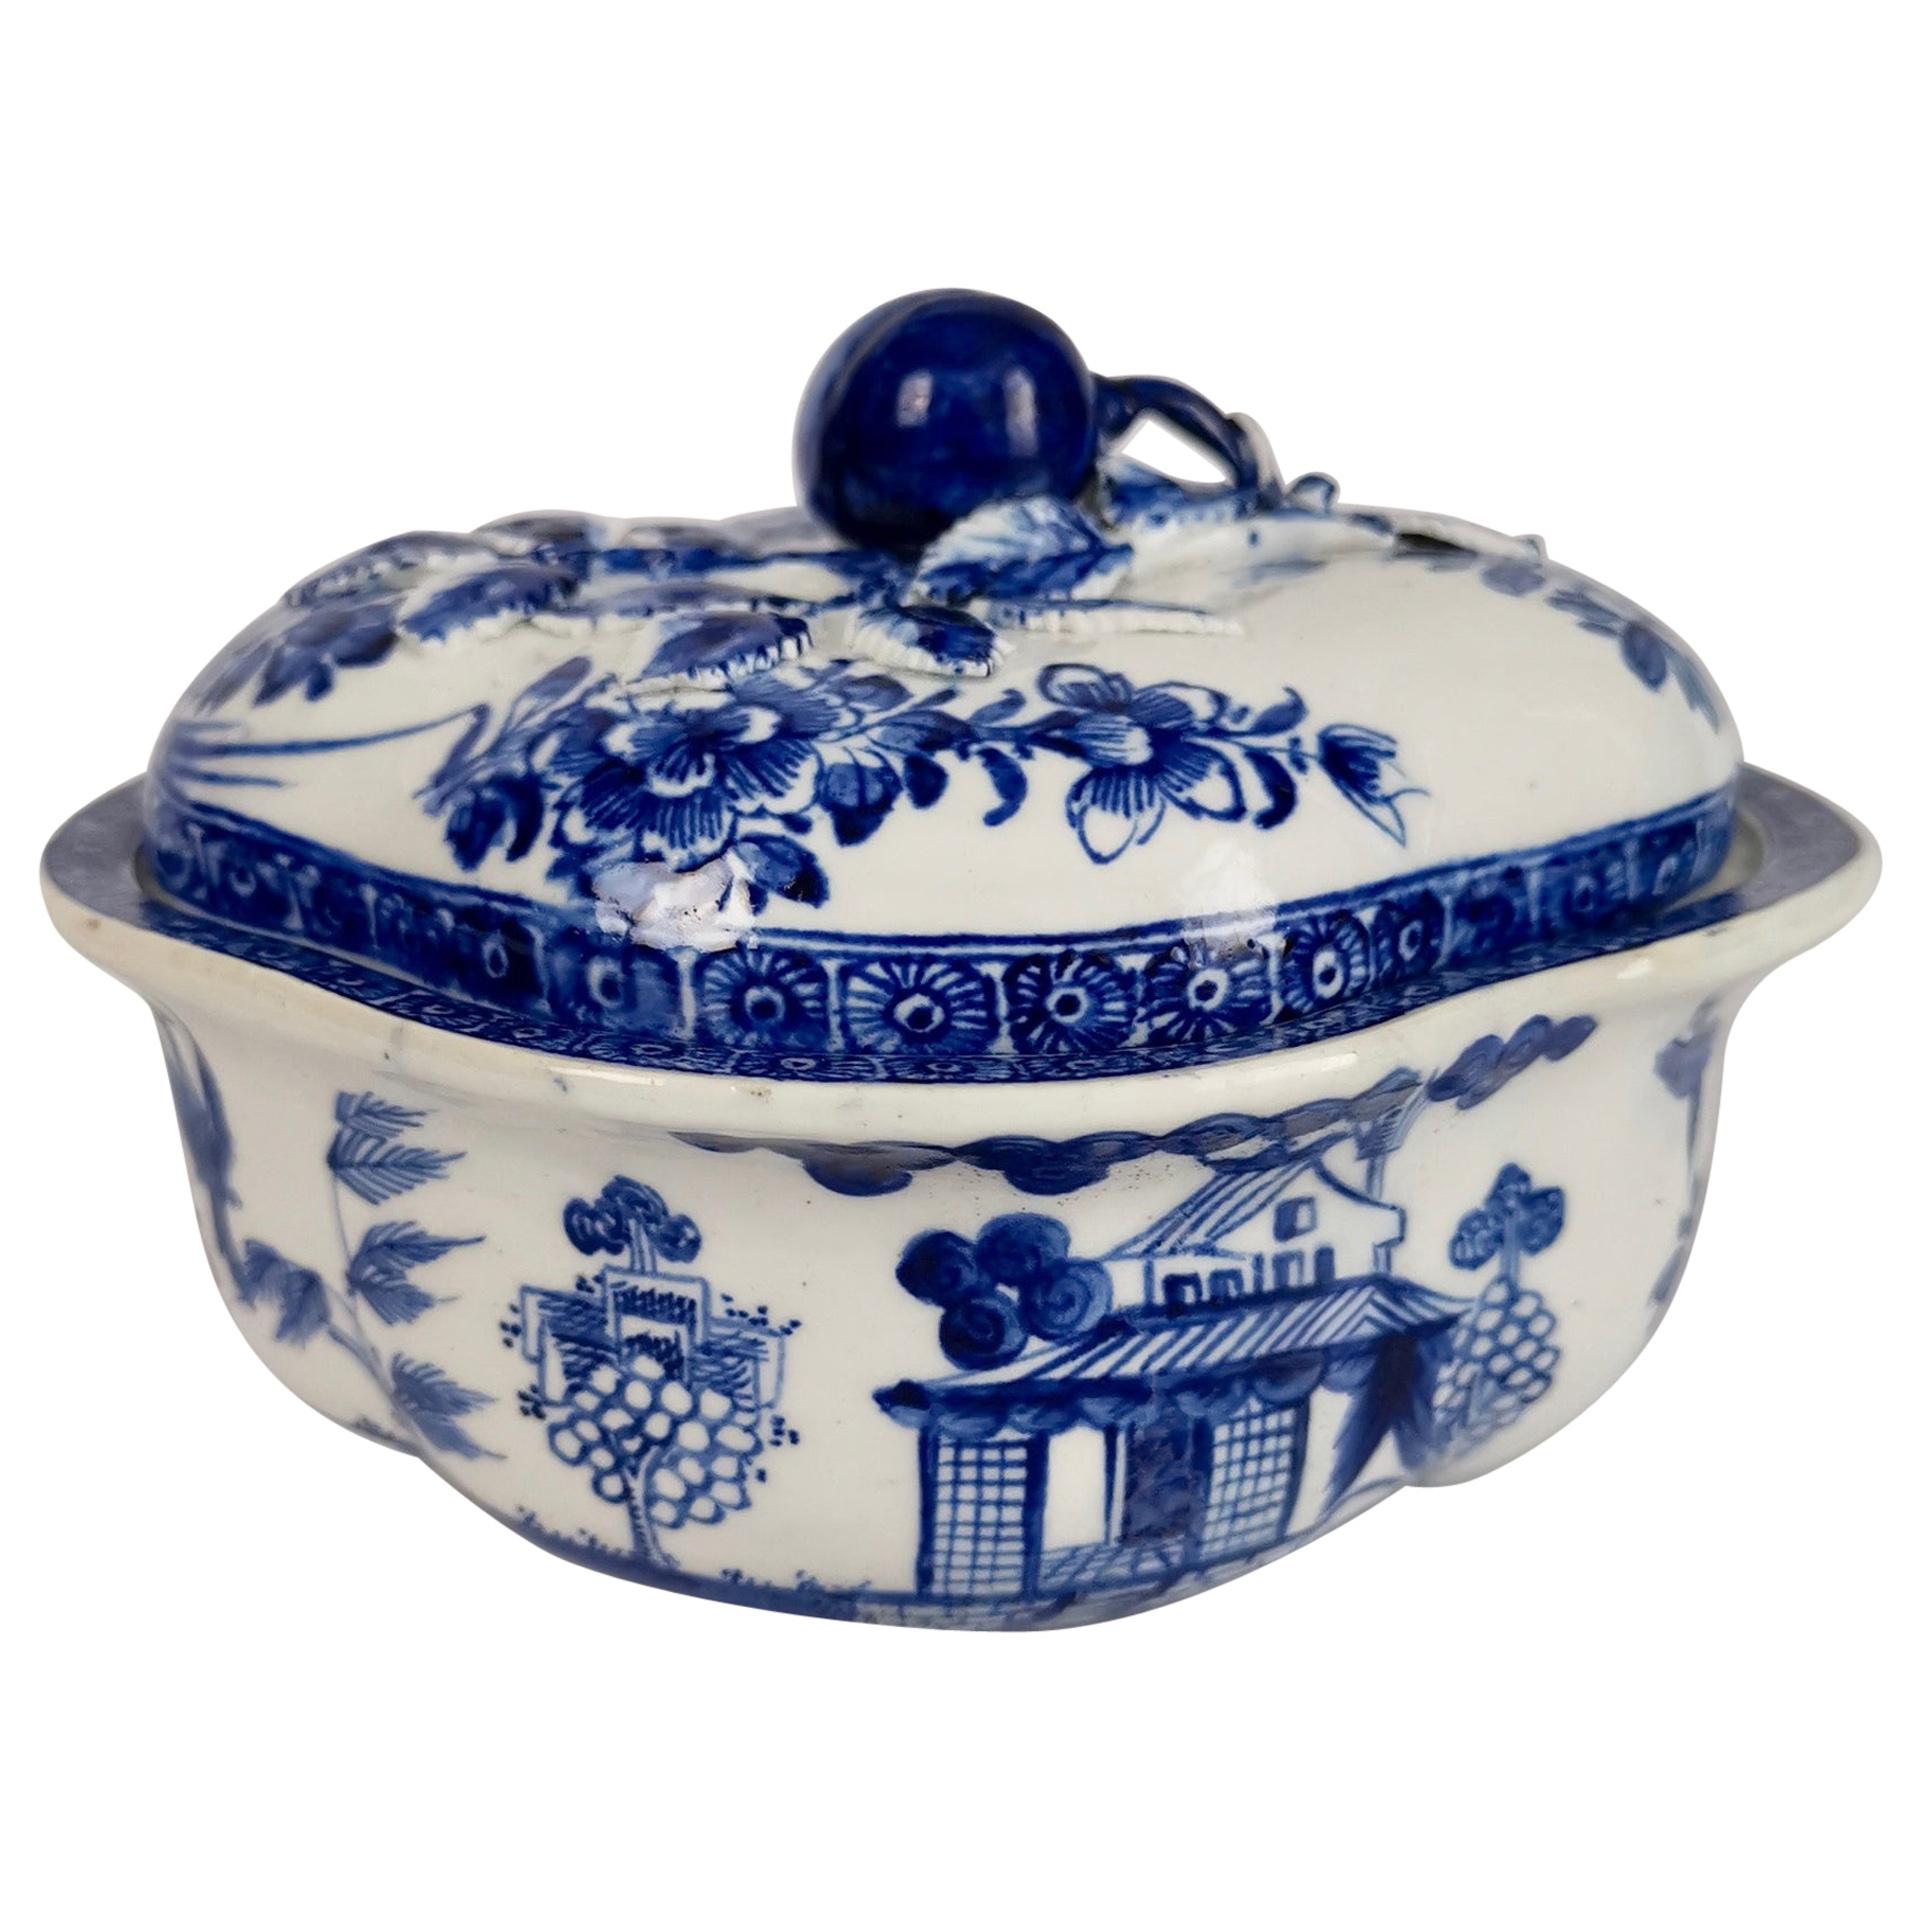 Derby Porcelain Cream Pot with Cover, Blue and White, ca 1765